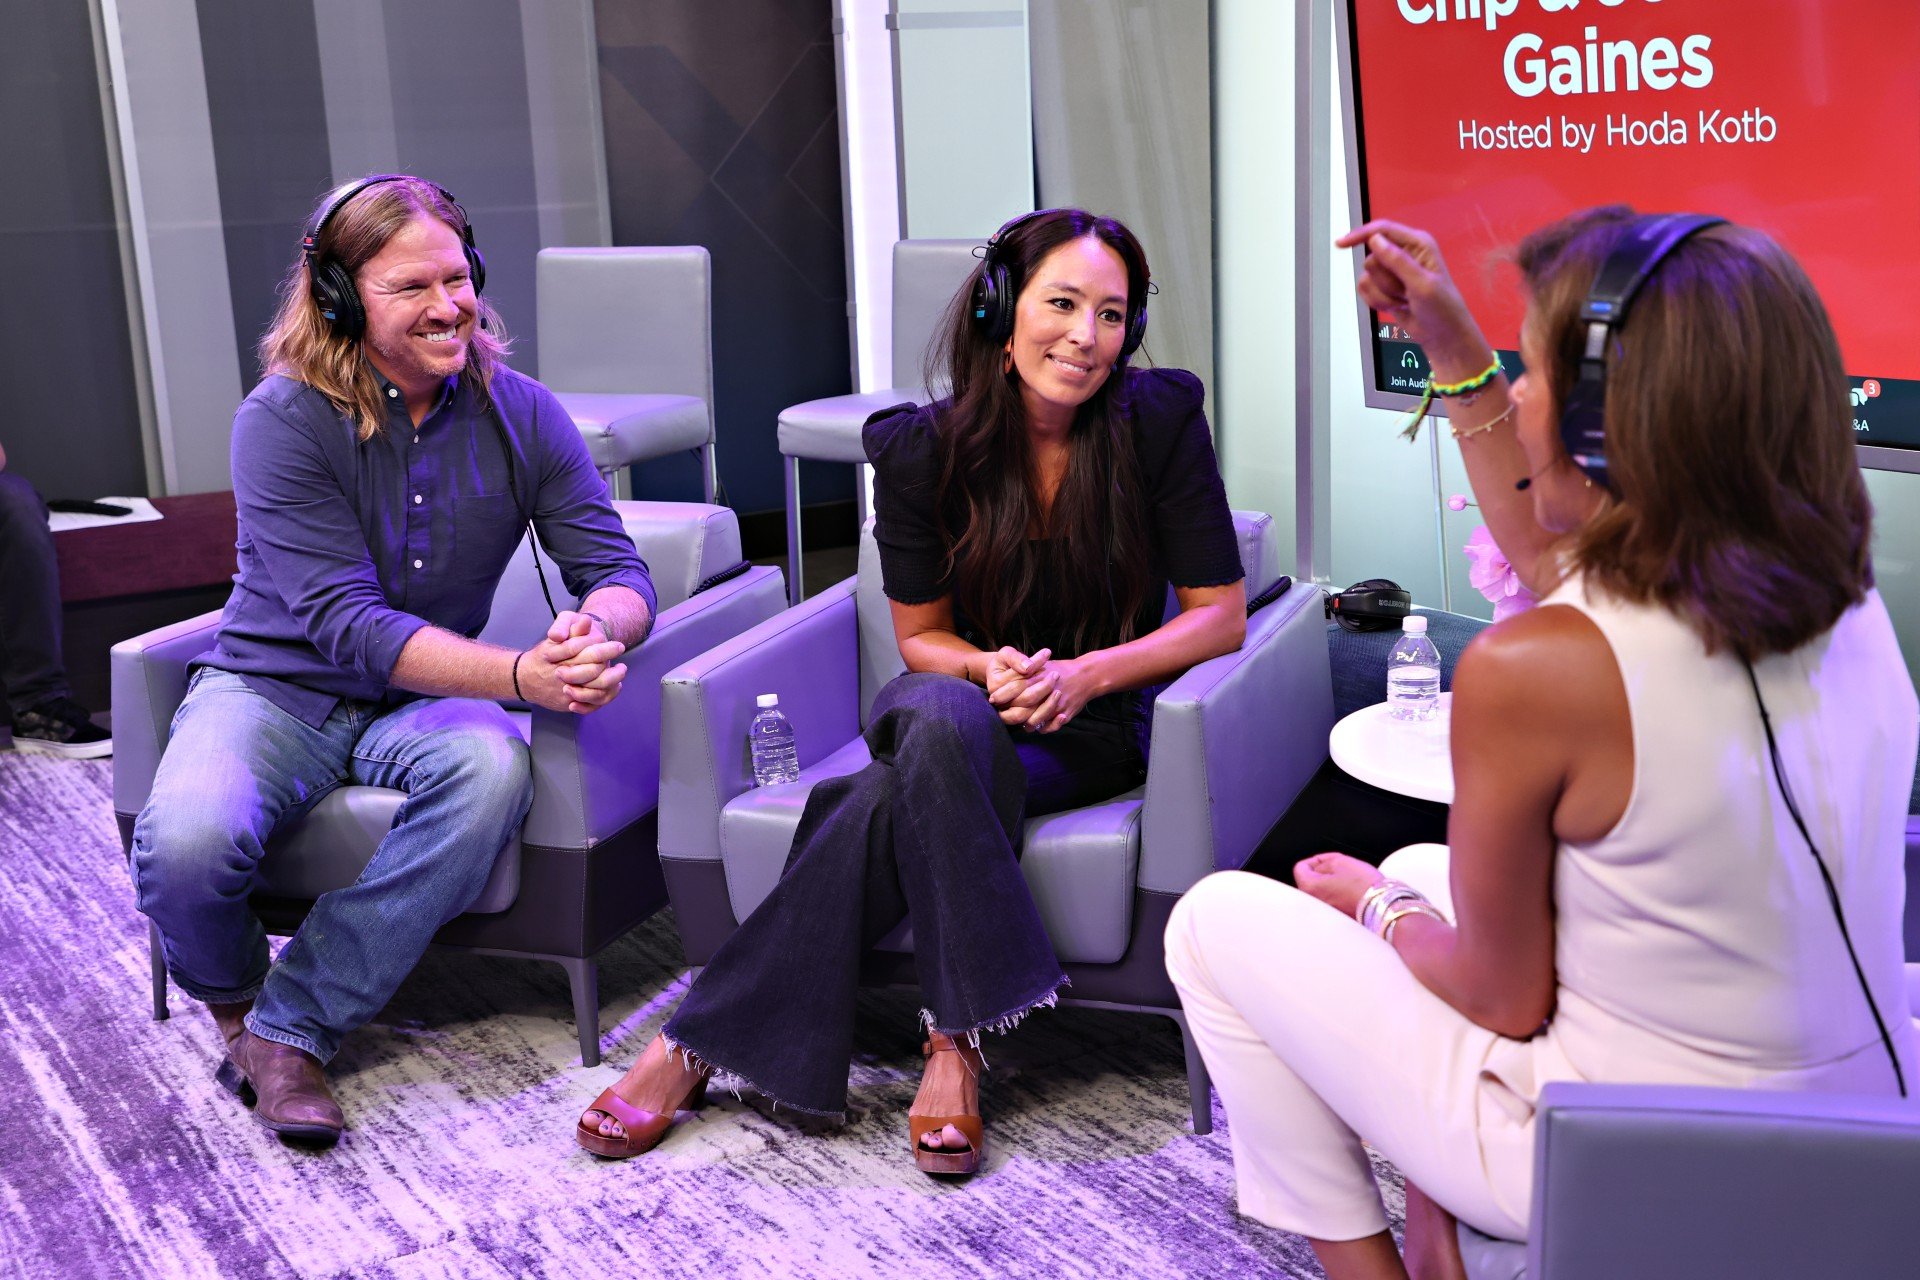 chip and joanna gaines sit down for an interview with hoda kotb on Sirus XM